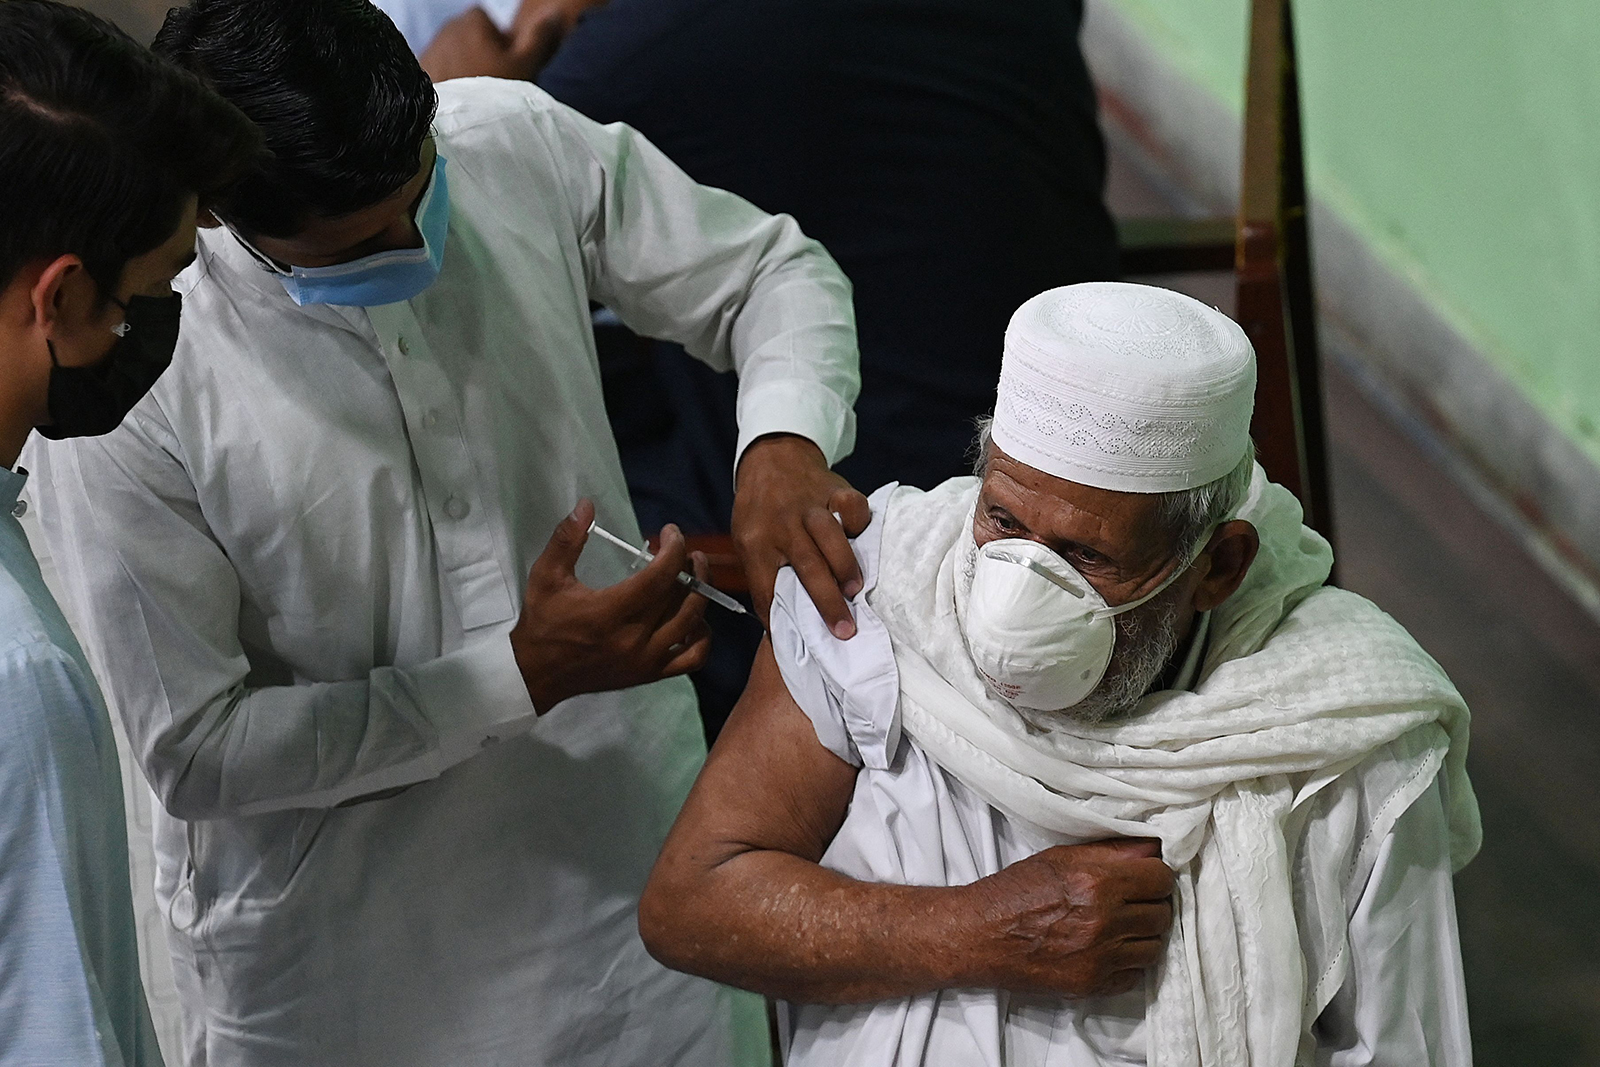 A health worker inoculates a man with a dose of the Sinopharm vaccine at a vaccination center, in Rawalpndi, Pakistan, on May 3.